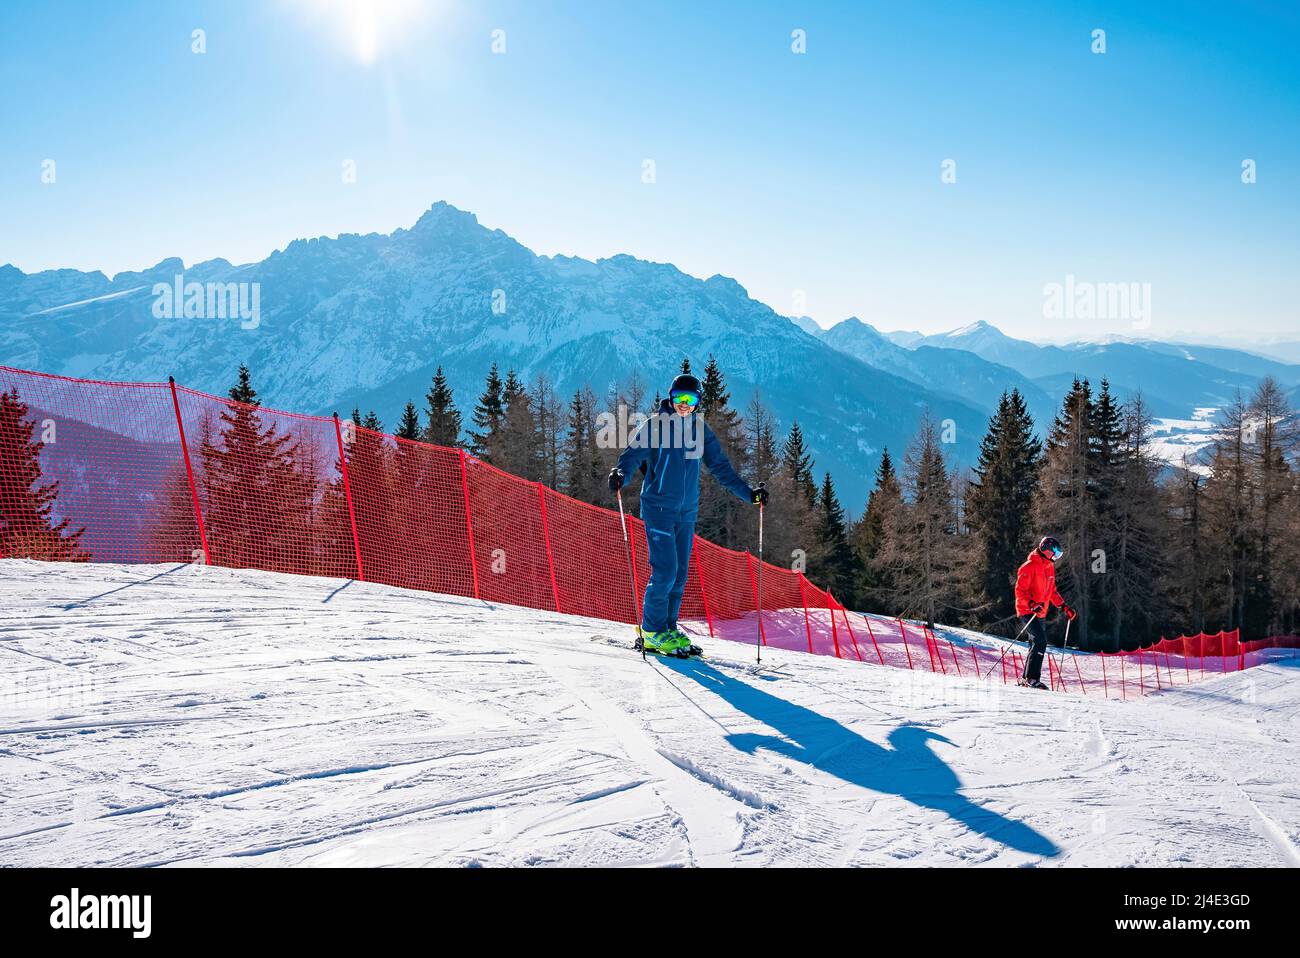 Happy skiers skiing by barrier on snow covered mountains against clear blue sky Stock Photo